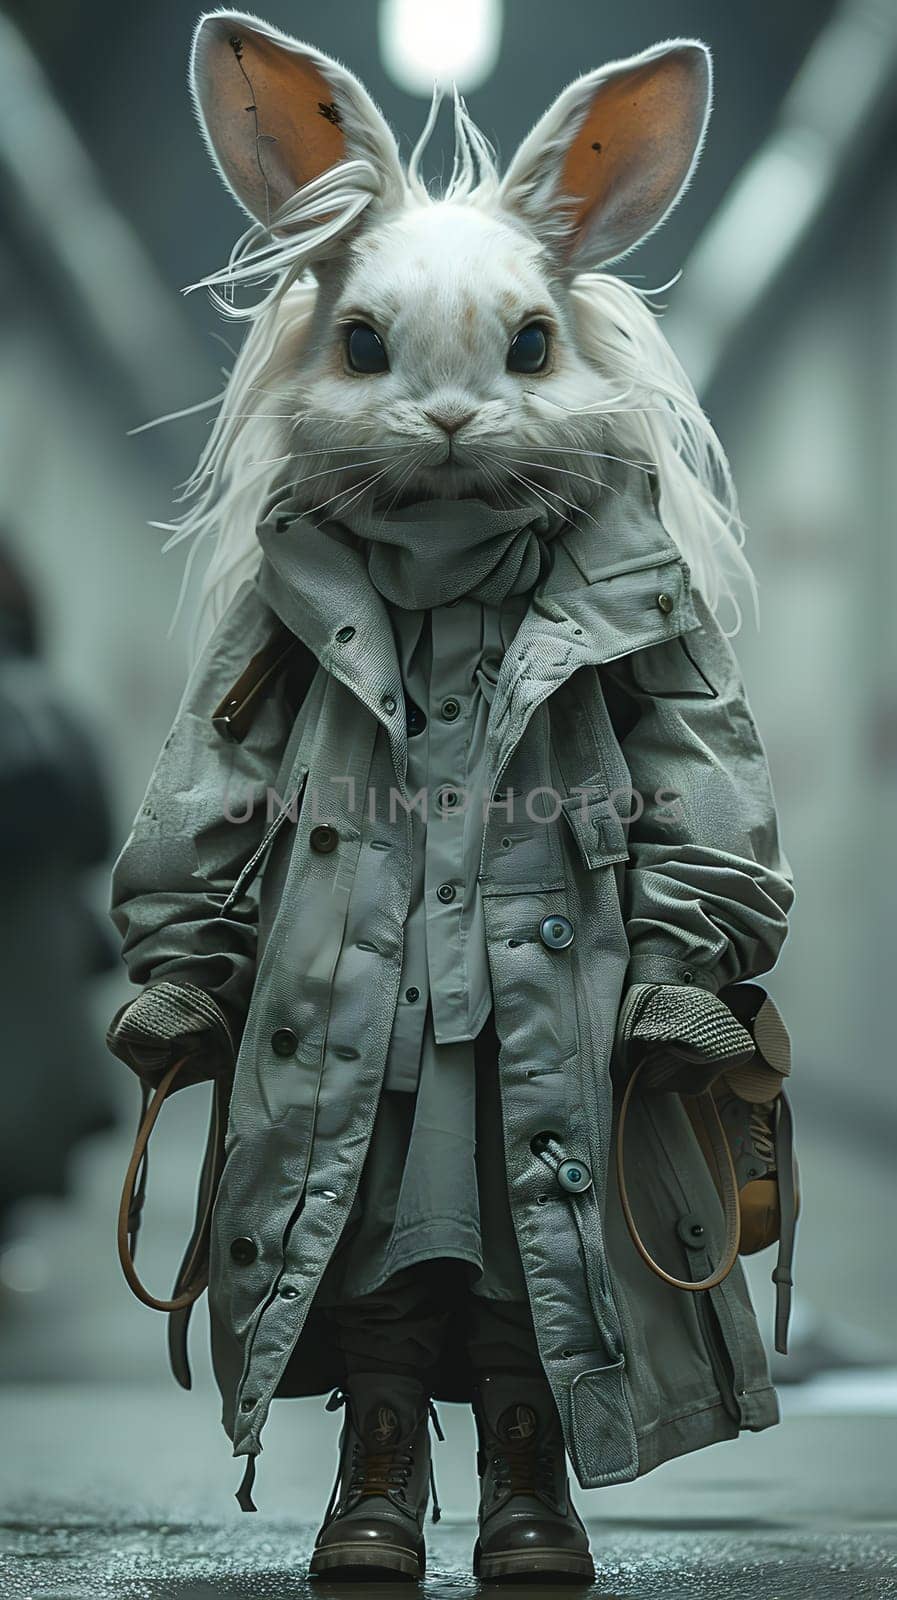 A fictional character, a white rabbit with long grey fur, whiskers, and ears, wearing a coat and boots. A happy terrestrial animal from the family Felidae, part of Rabbits and Hares